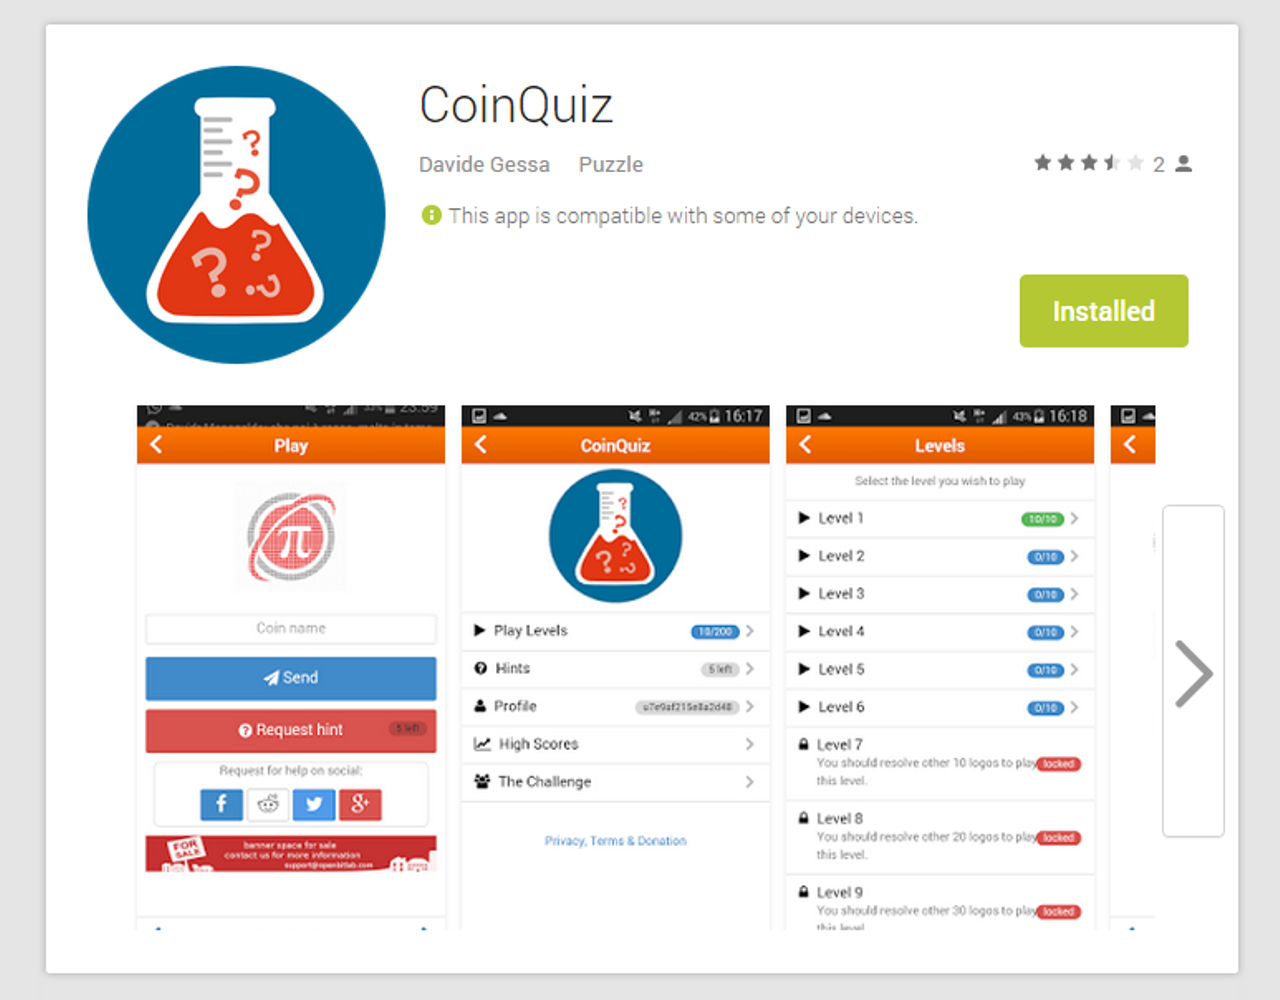 coinquiz_game_cover_image